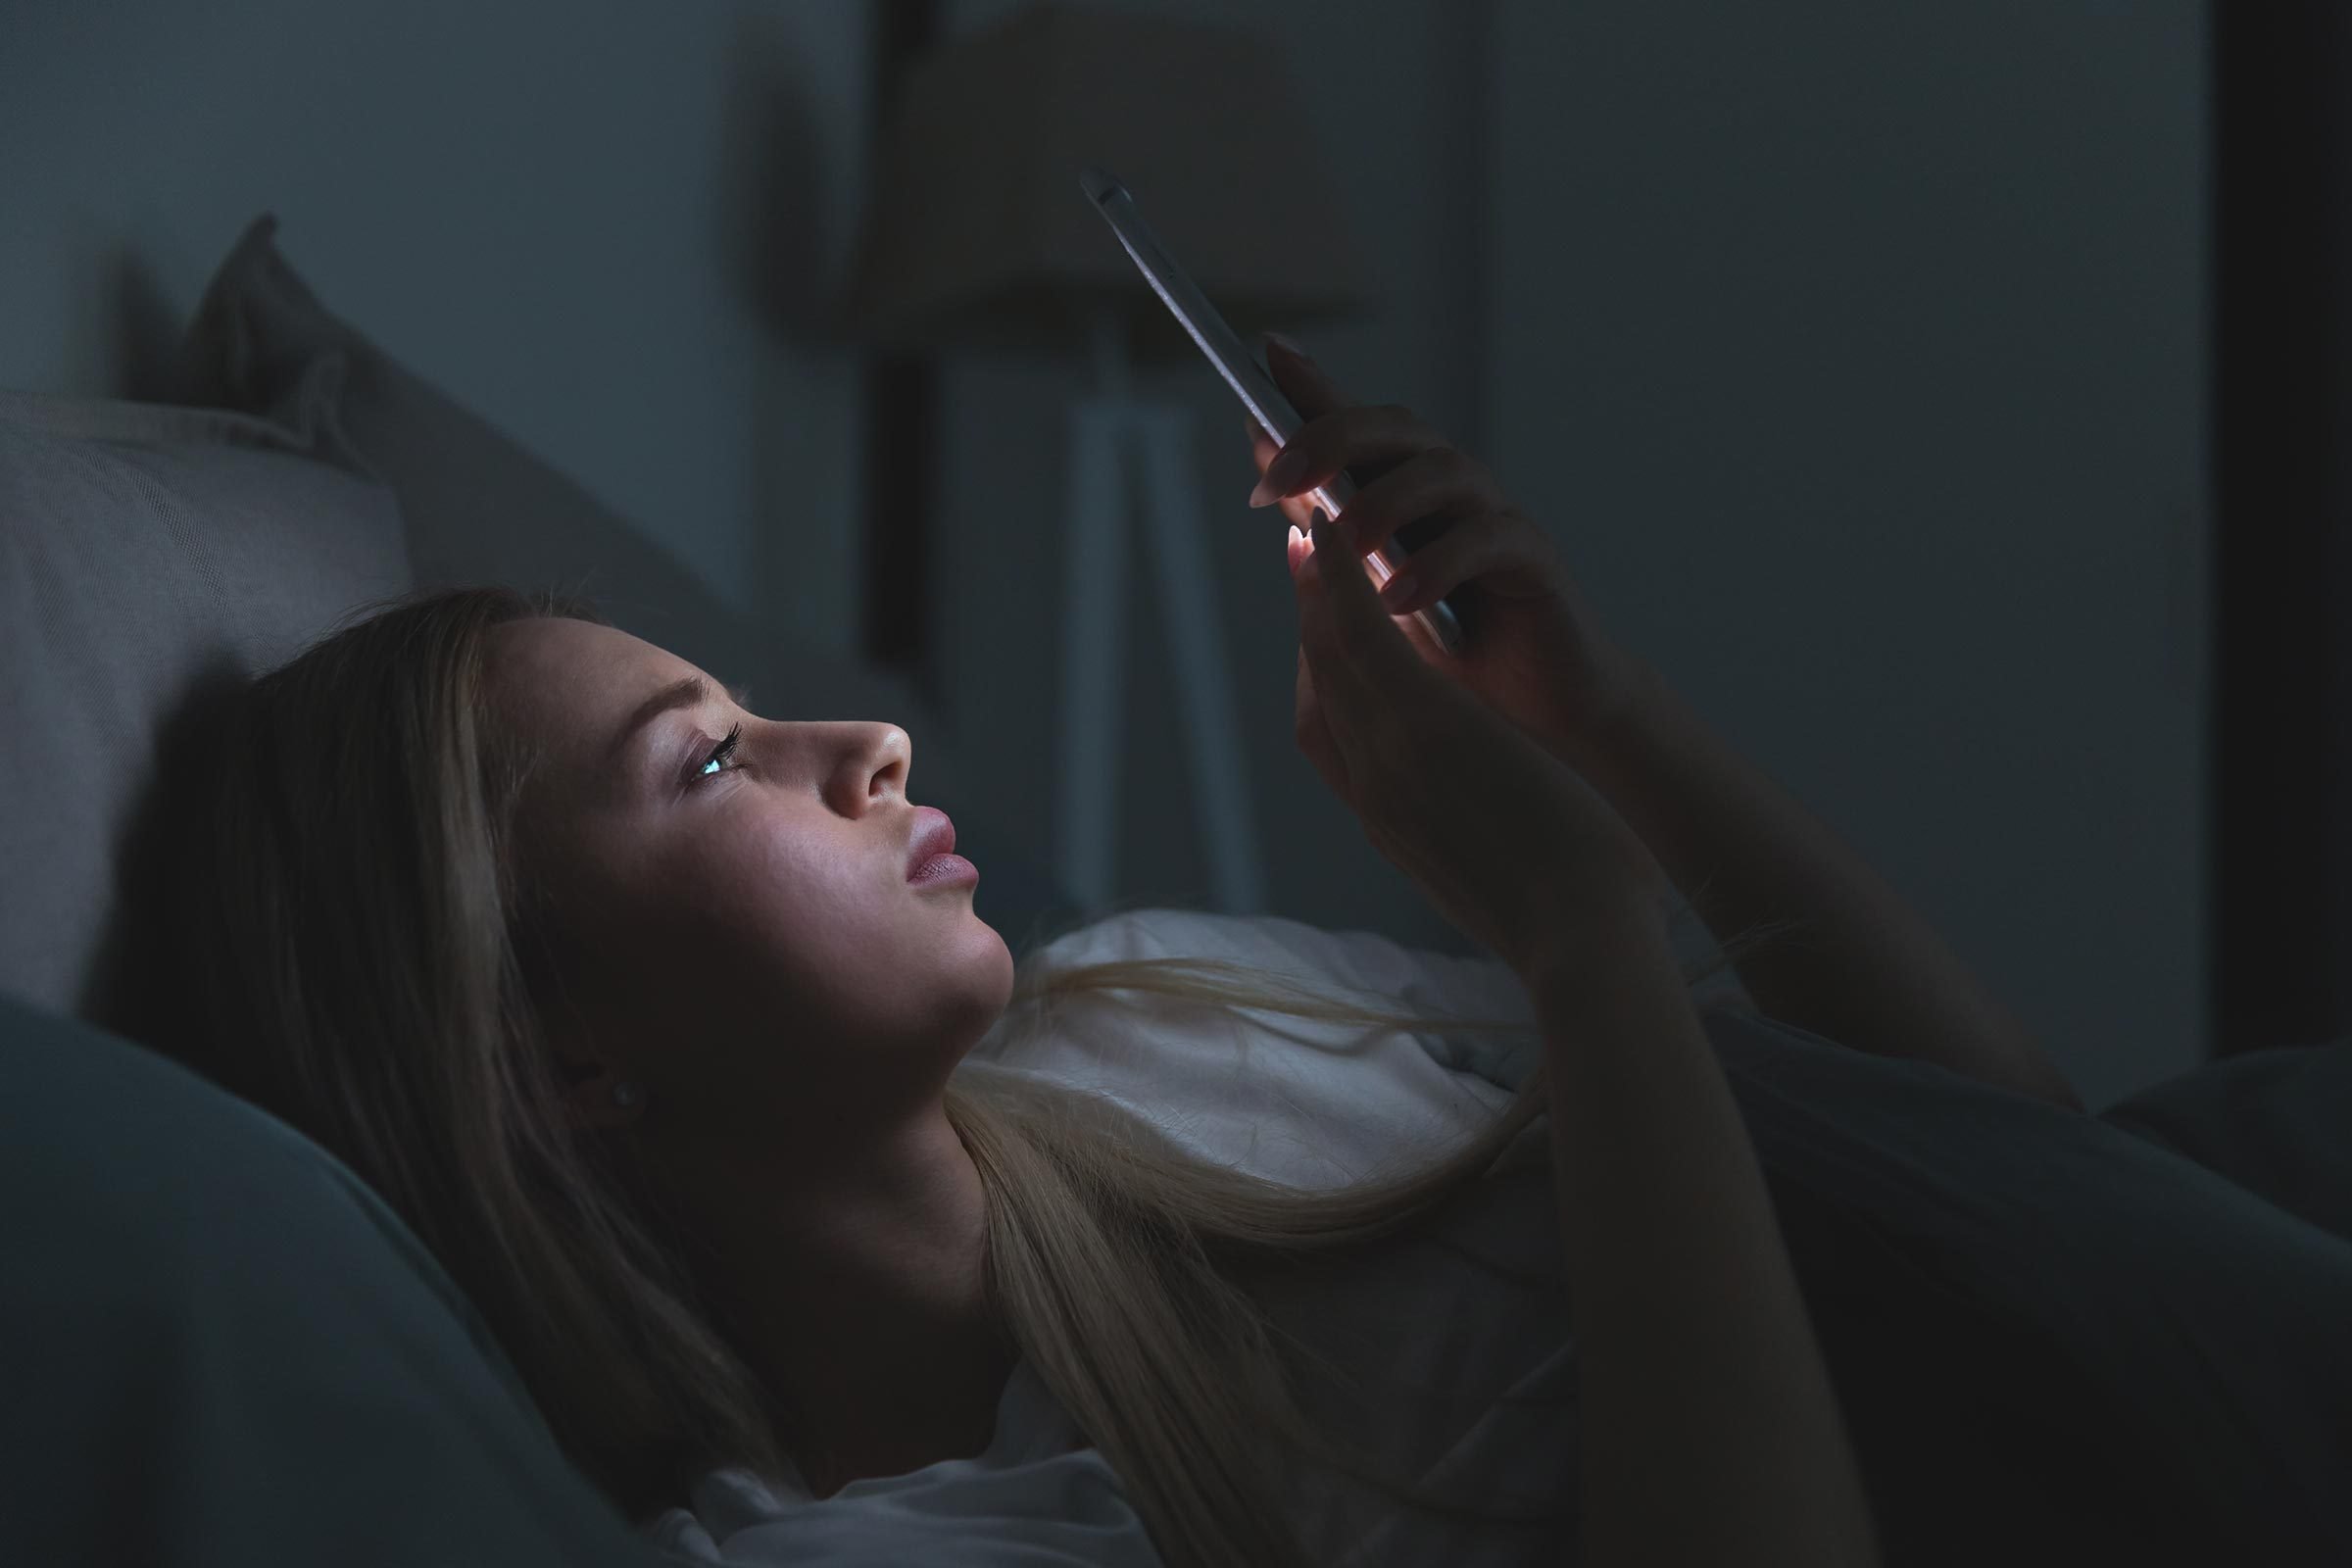 If Your Phone Rings Once in the Middle of the Night, Don't Call Back